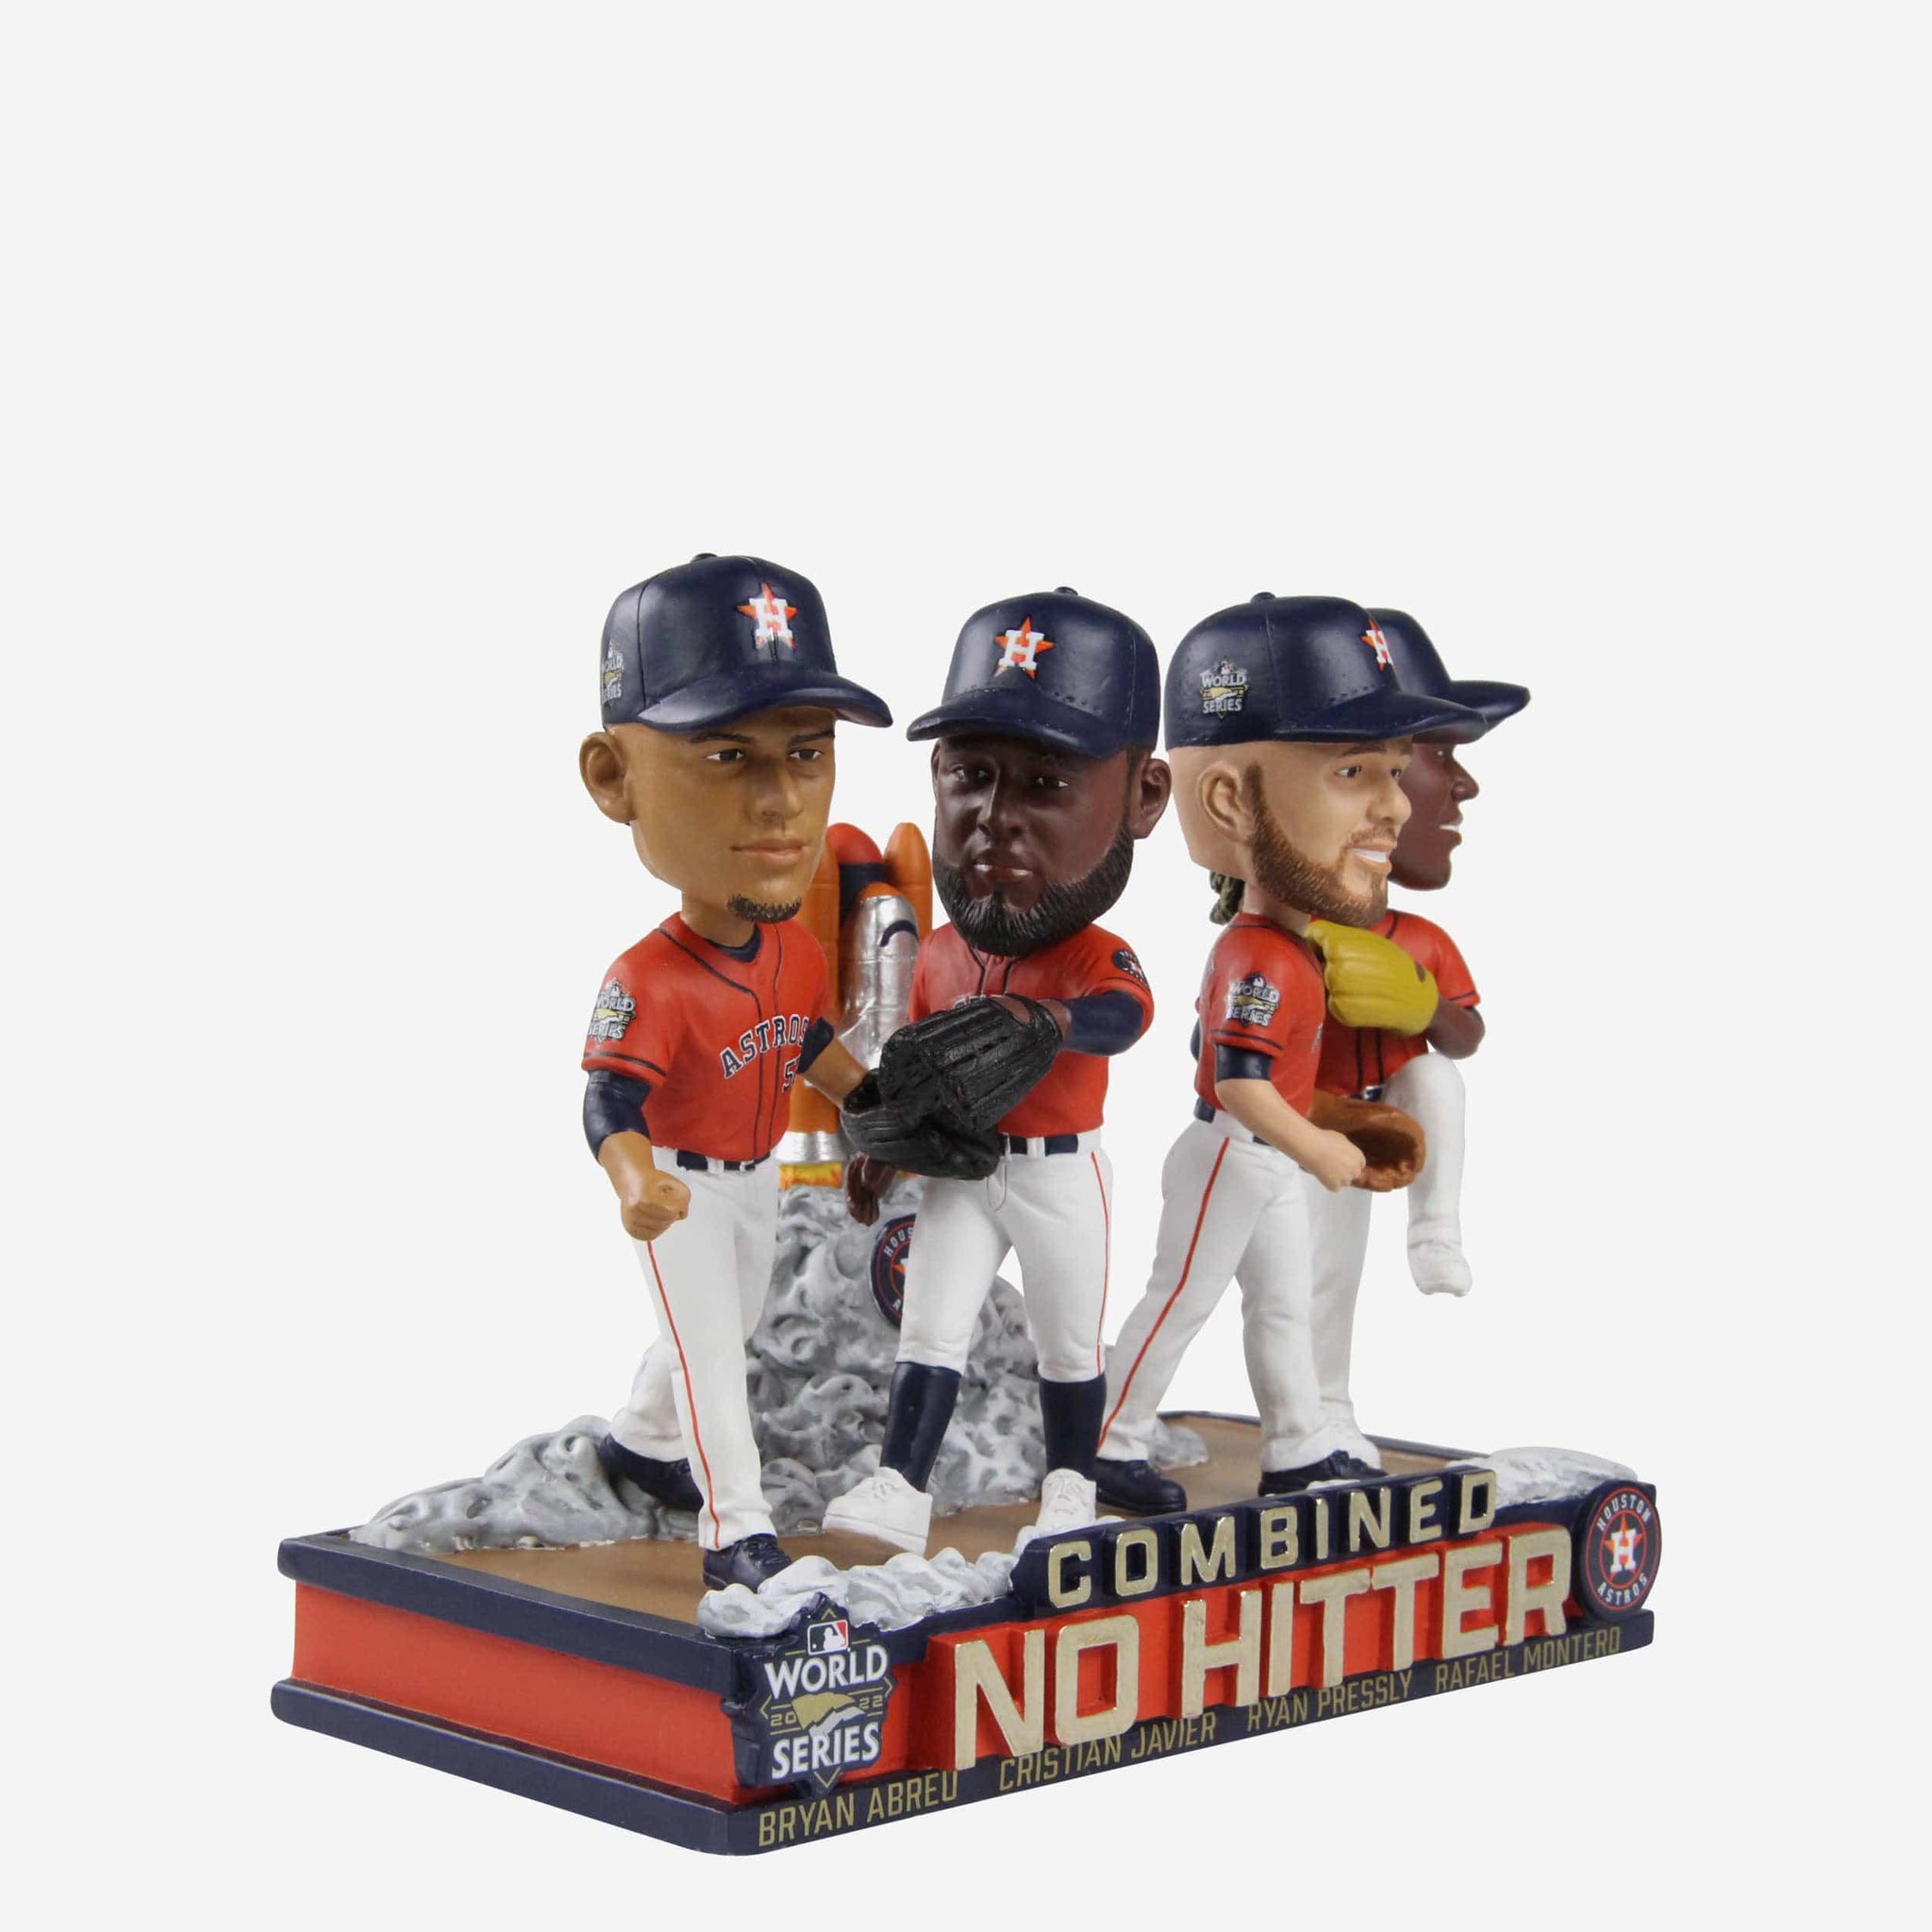 Houston Astros are heavy hitters when it comes to bobblehead